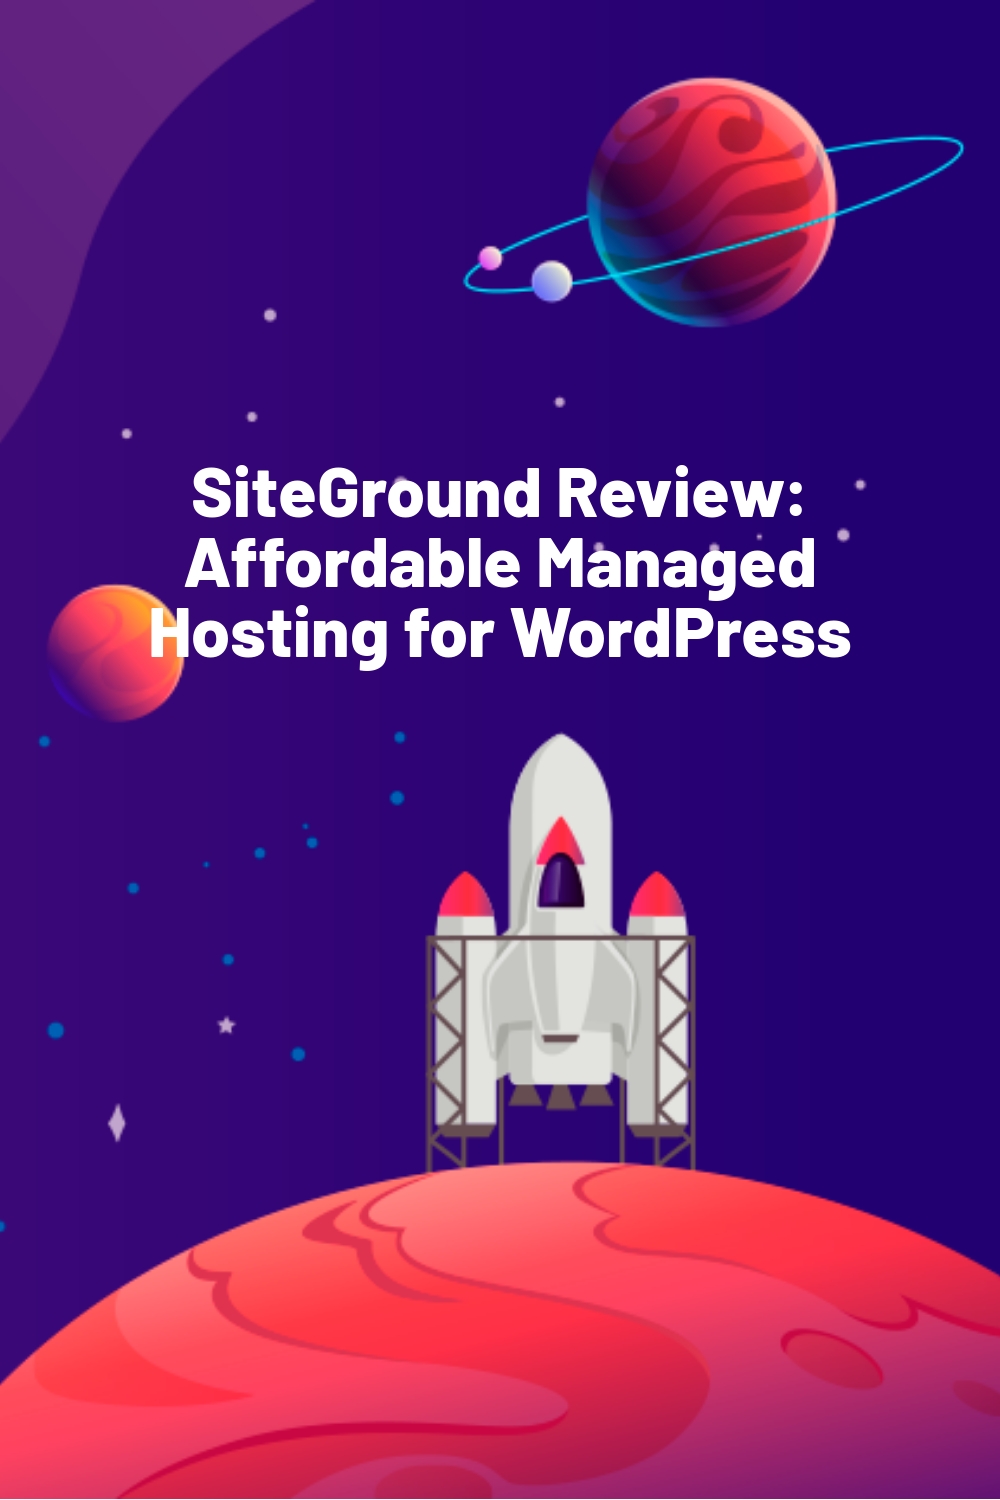 SiteGround Review: Affordable Managed Hosting for WordPress